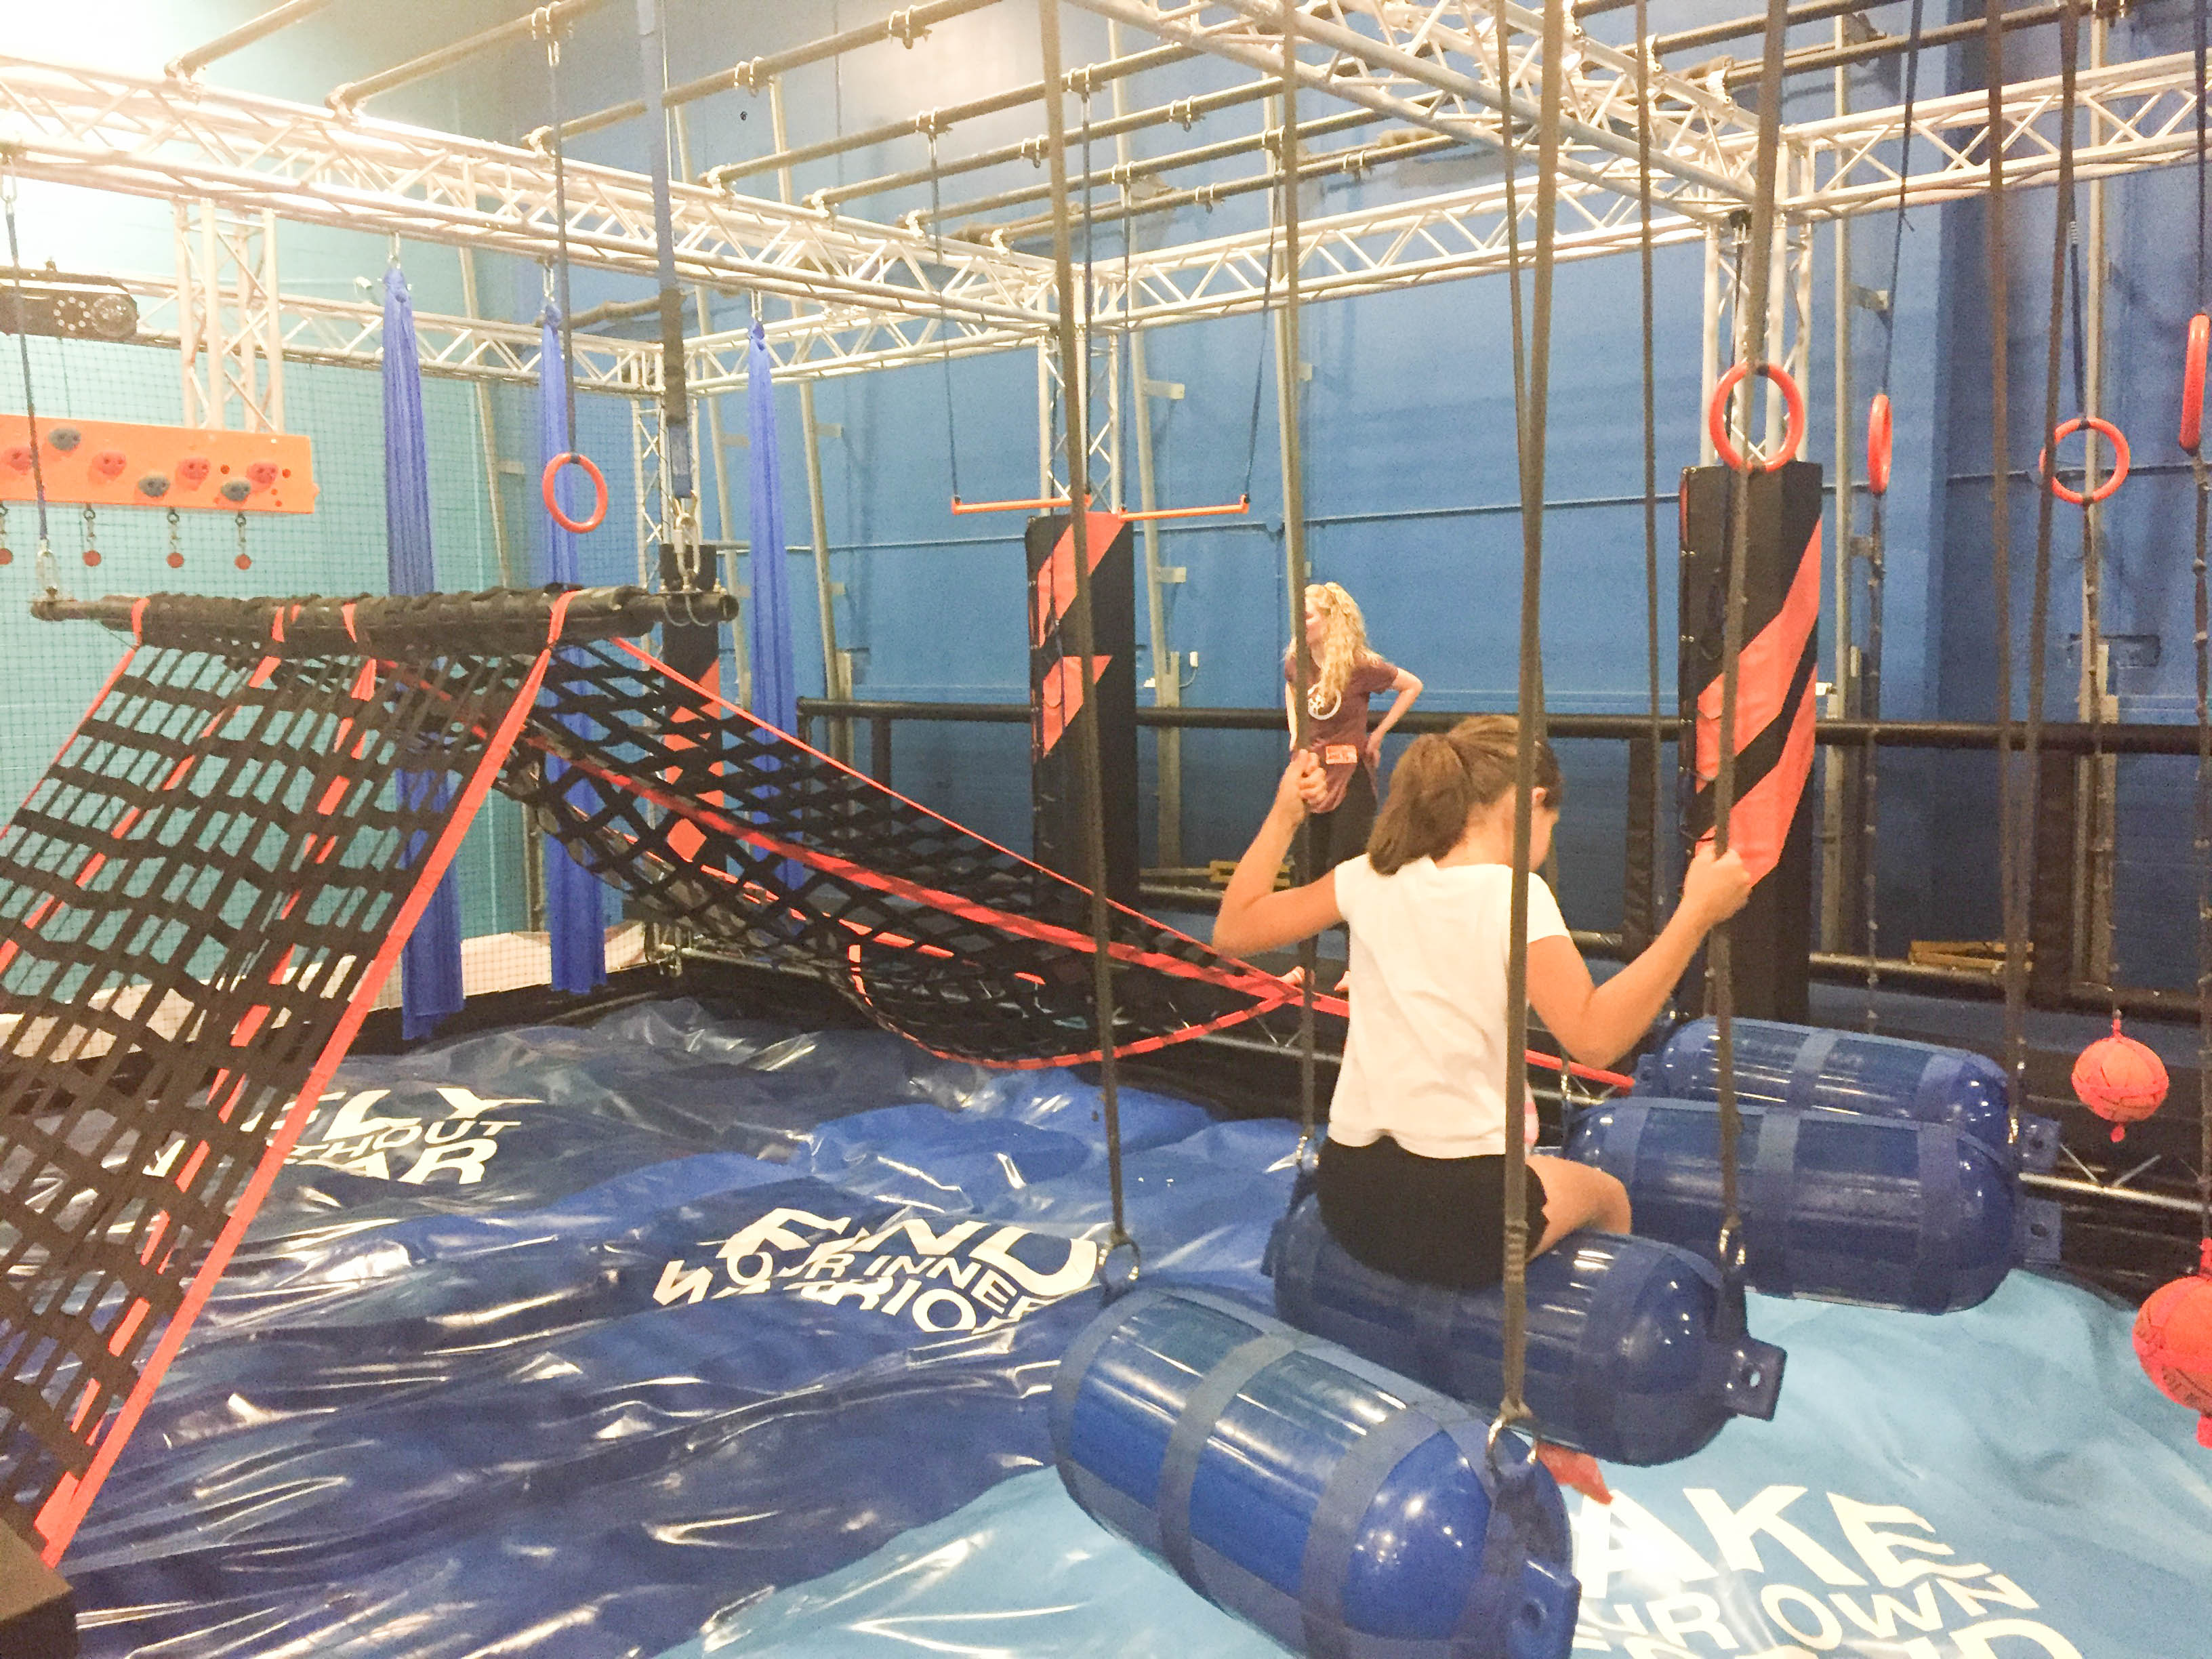 Sky Zone Trampoline Park Birthday Party;Ultimate Warrior Course ; Livin' Life with Style